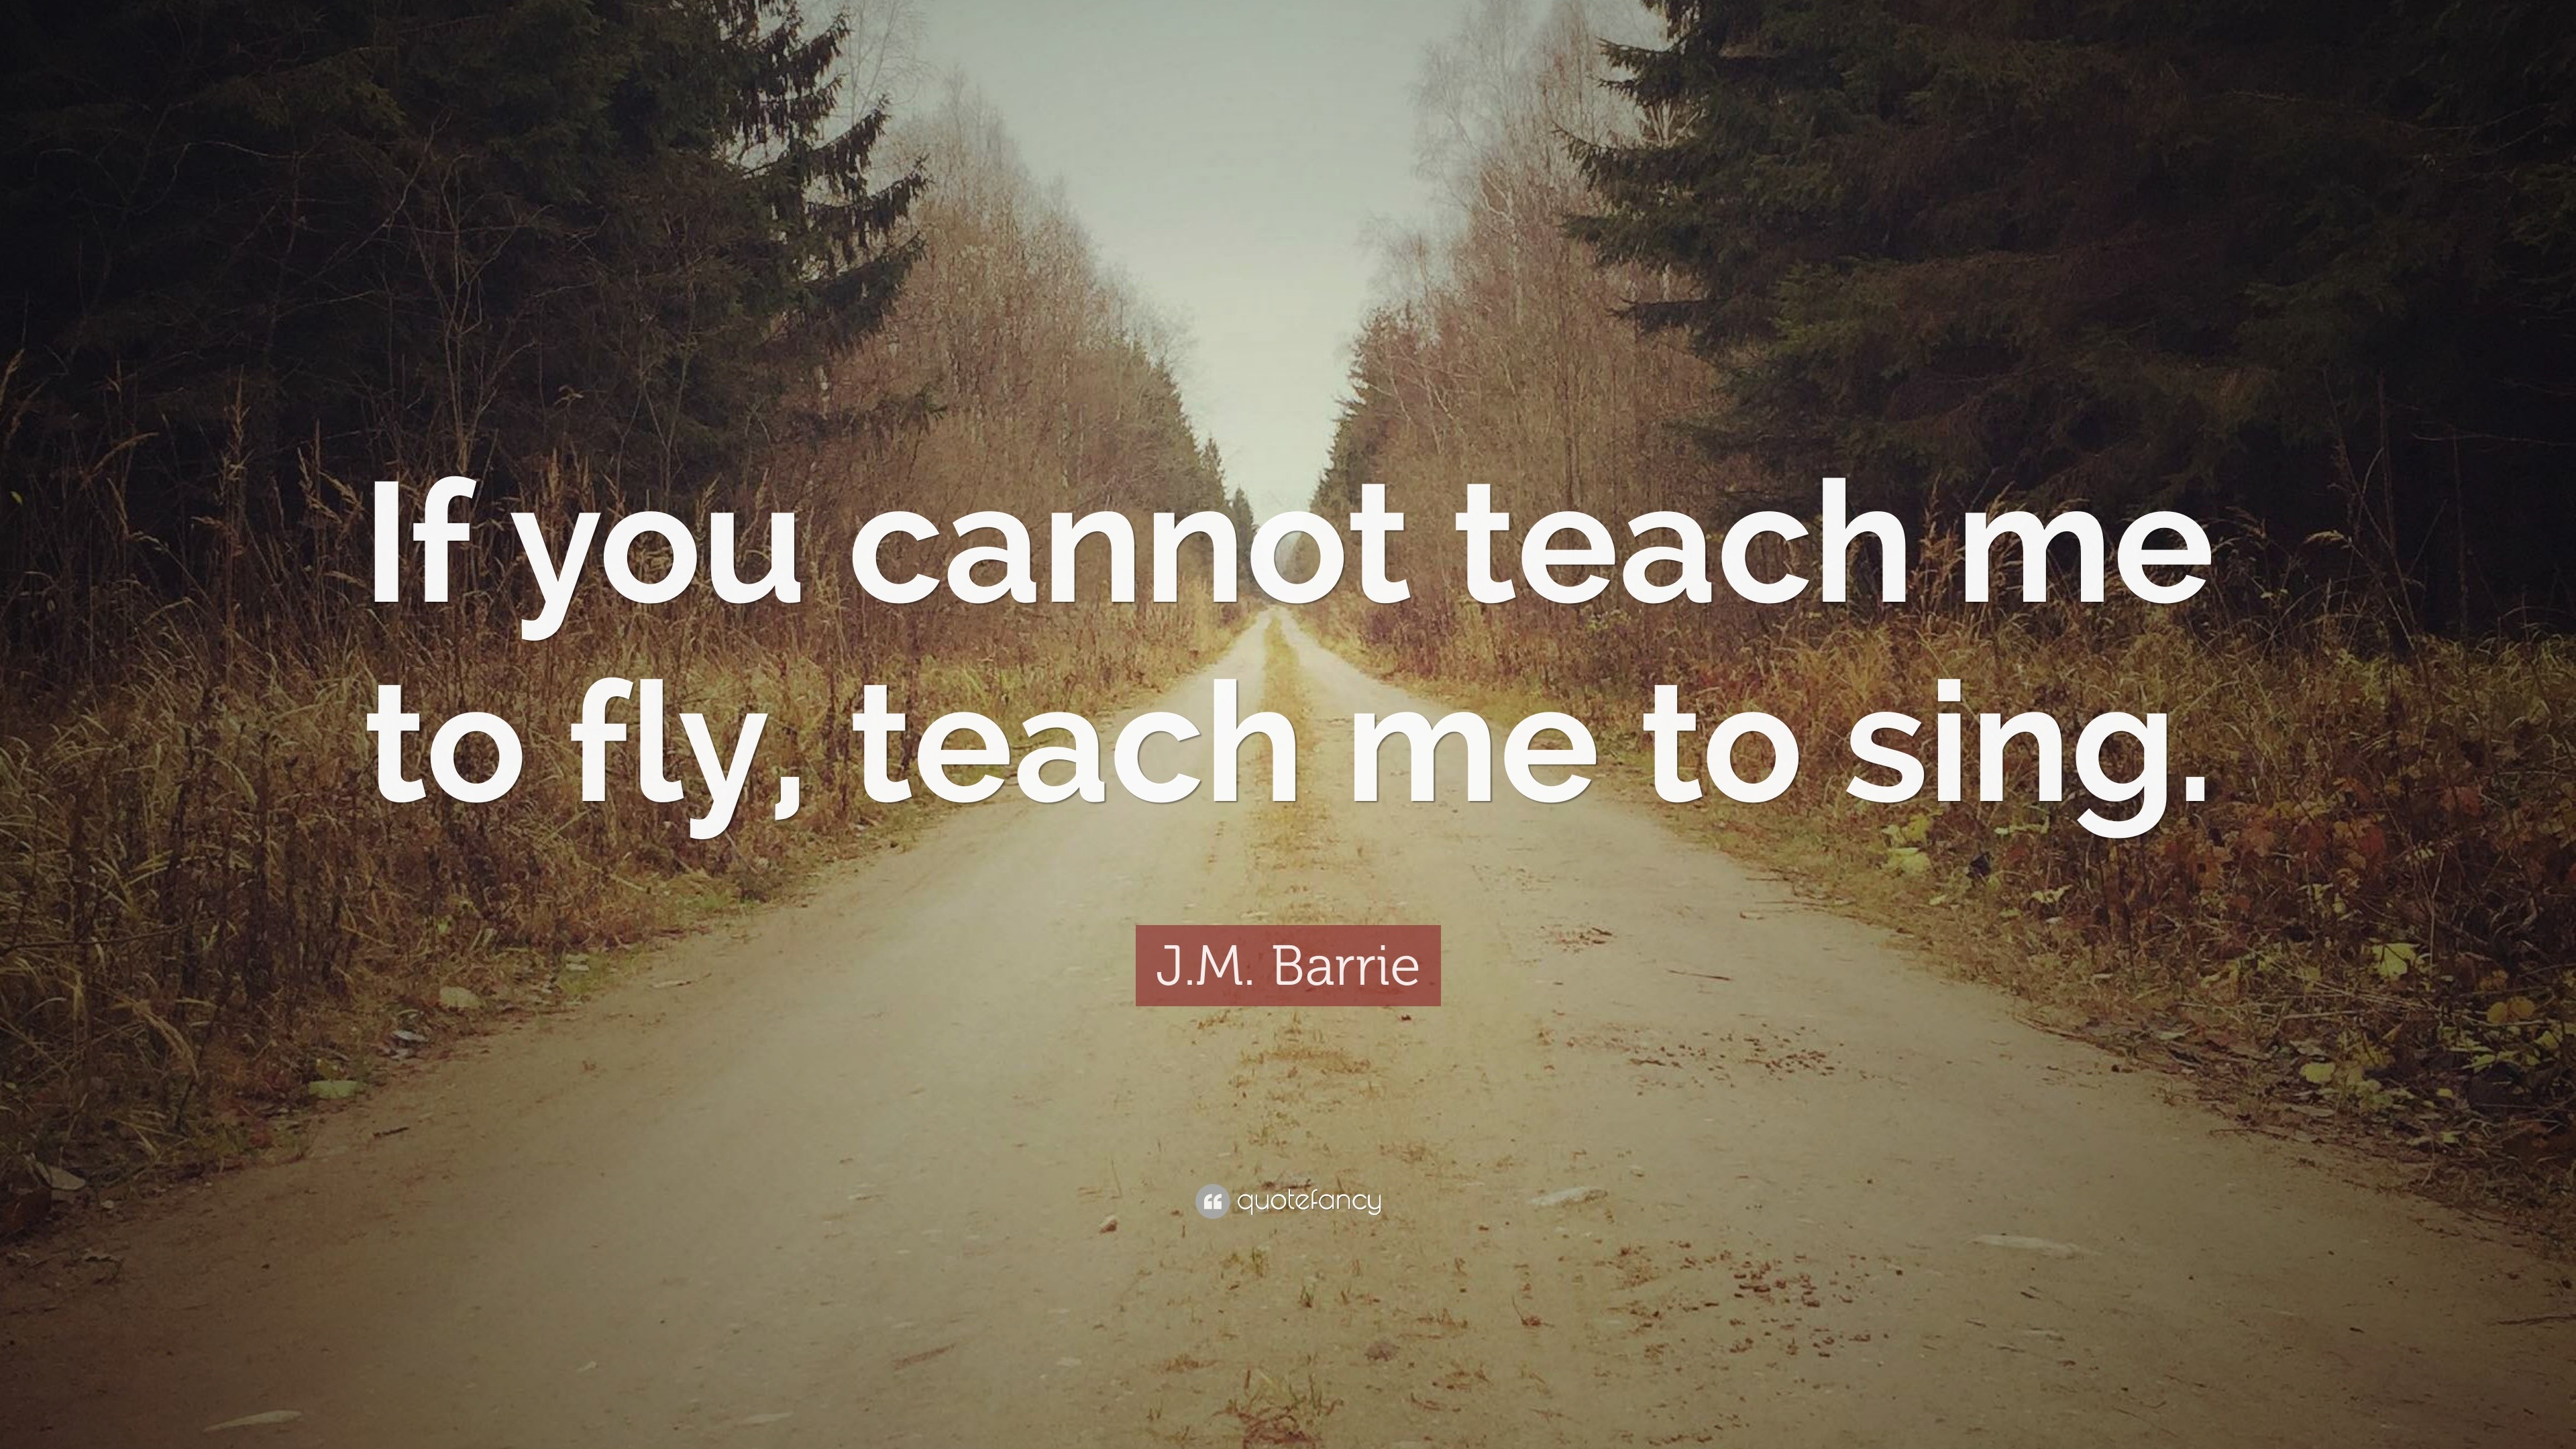 J.M. Barrie Quote: “If you cannot teach me to fly, teach me to sing.”